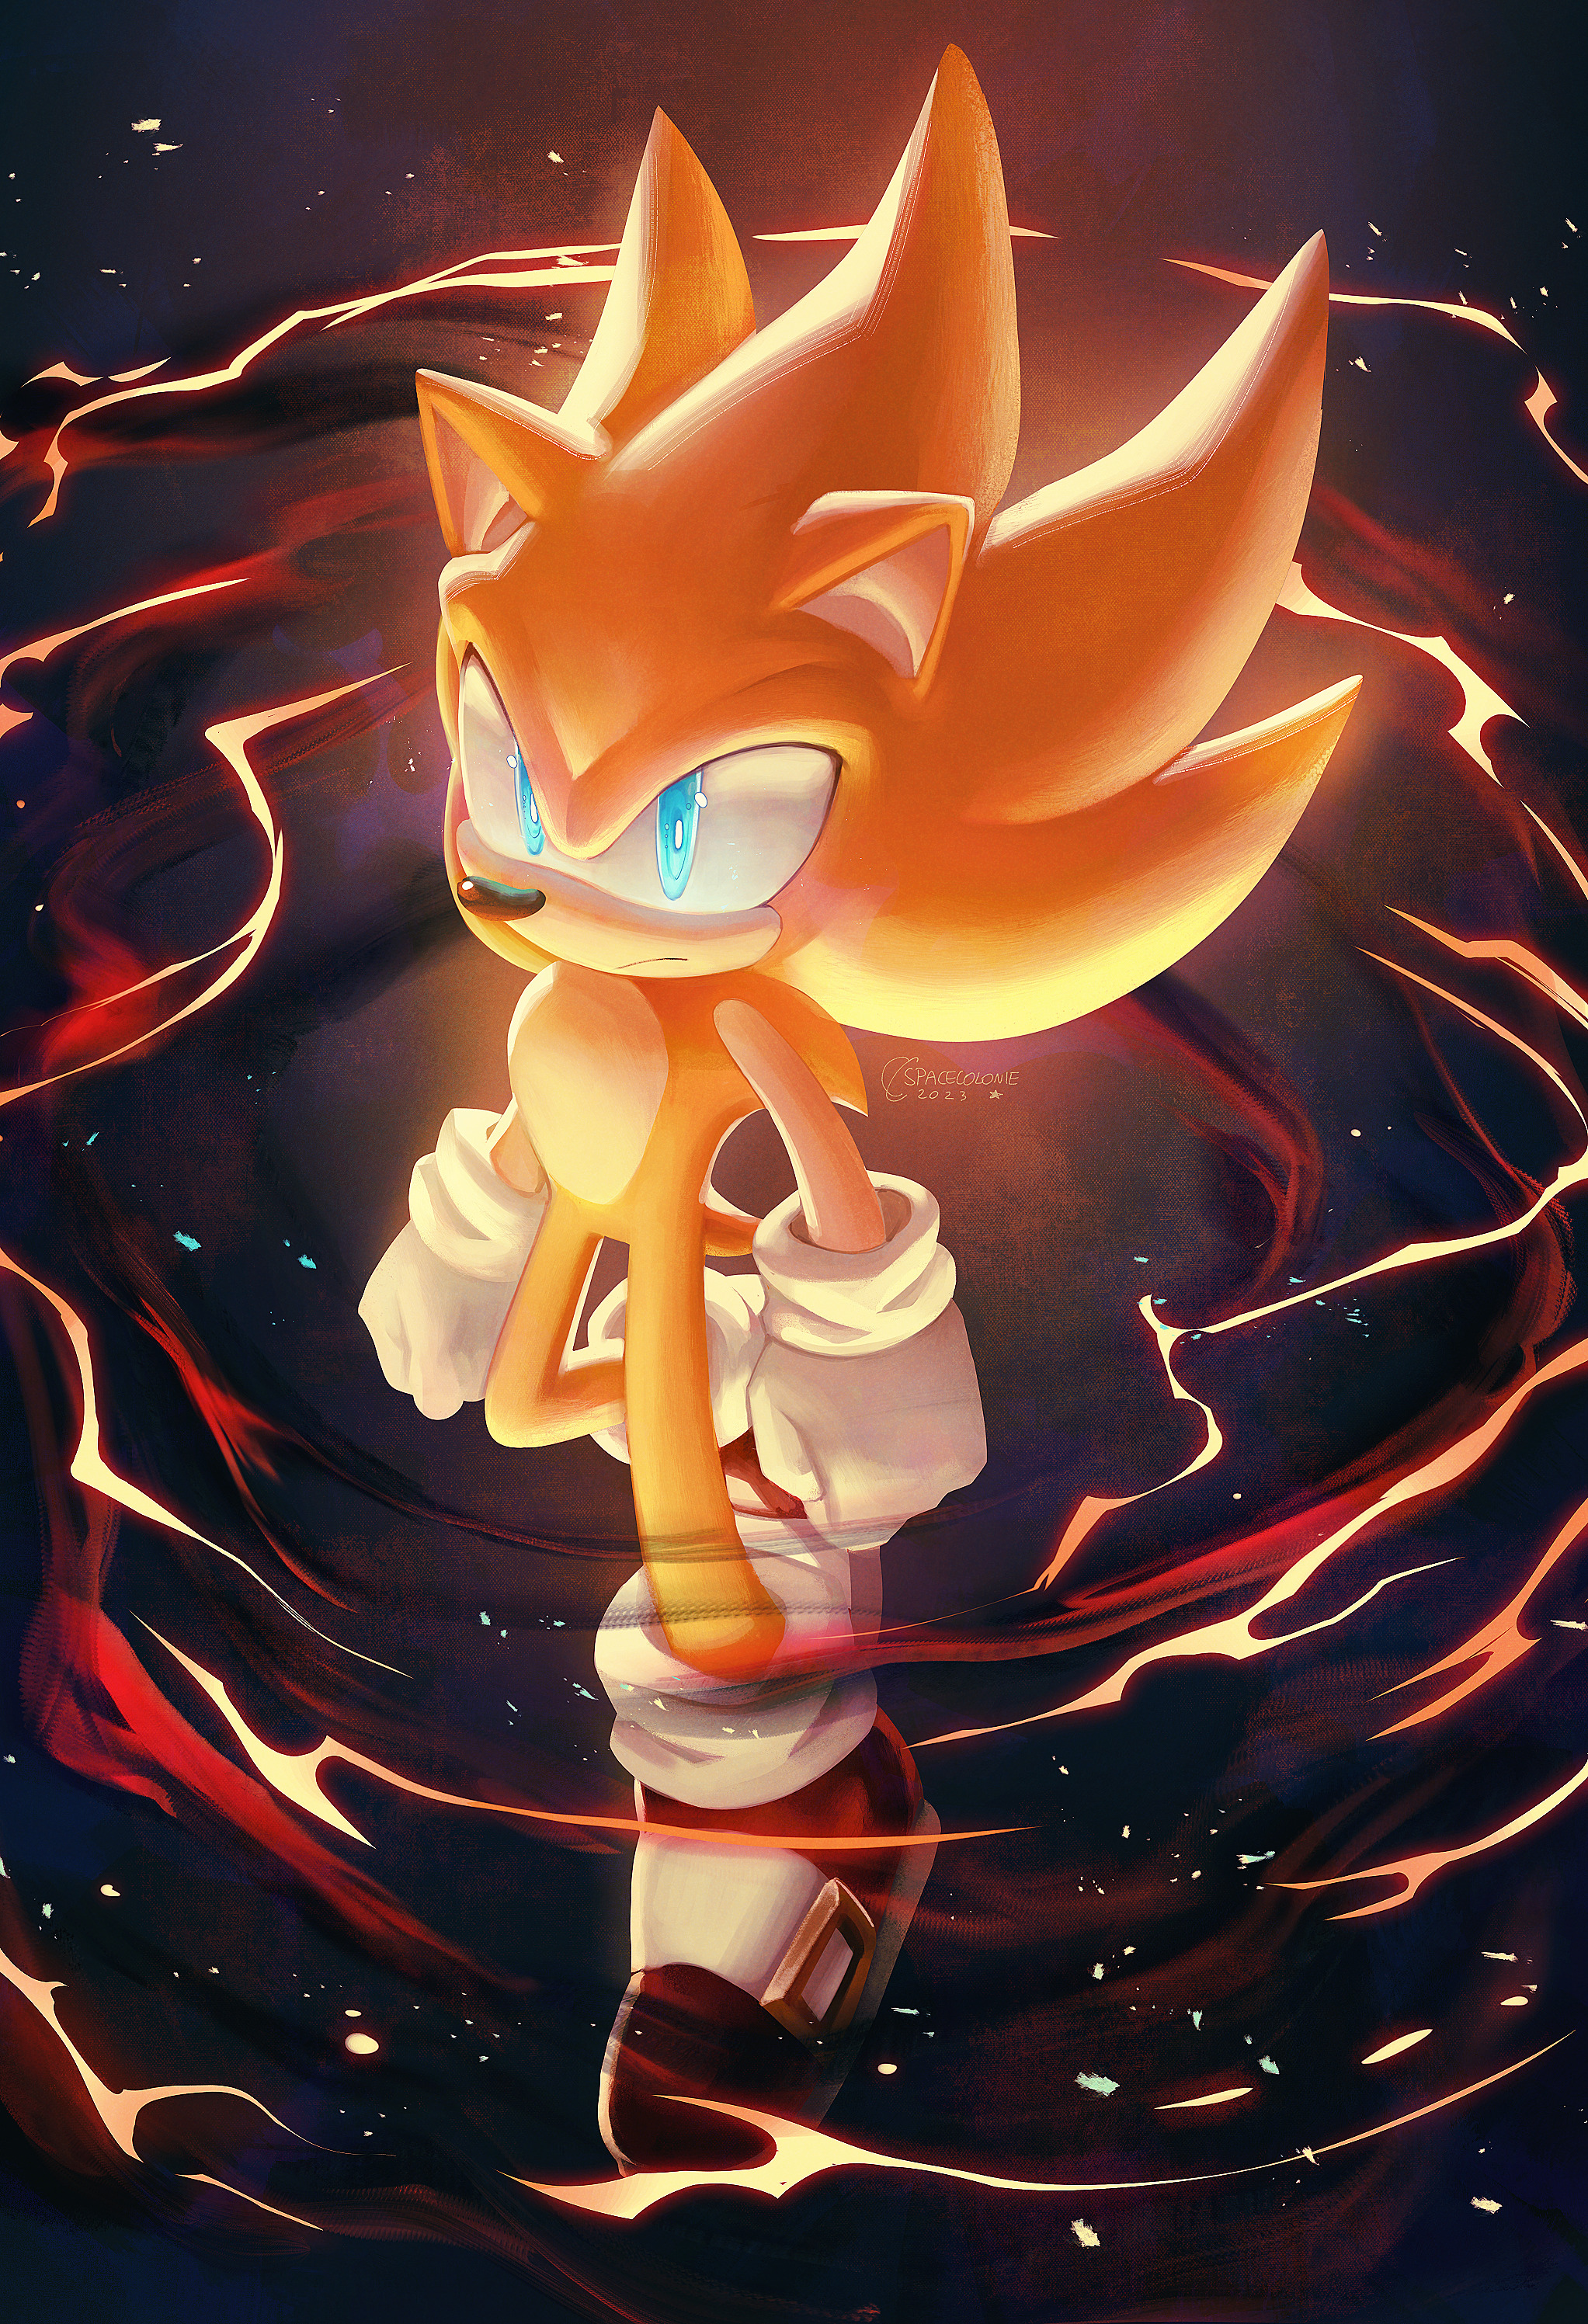 sonic the hedgehog, super sonic, and super sonic 2 (sonic and 1 more) drawn  by kornart